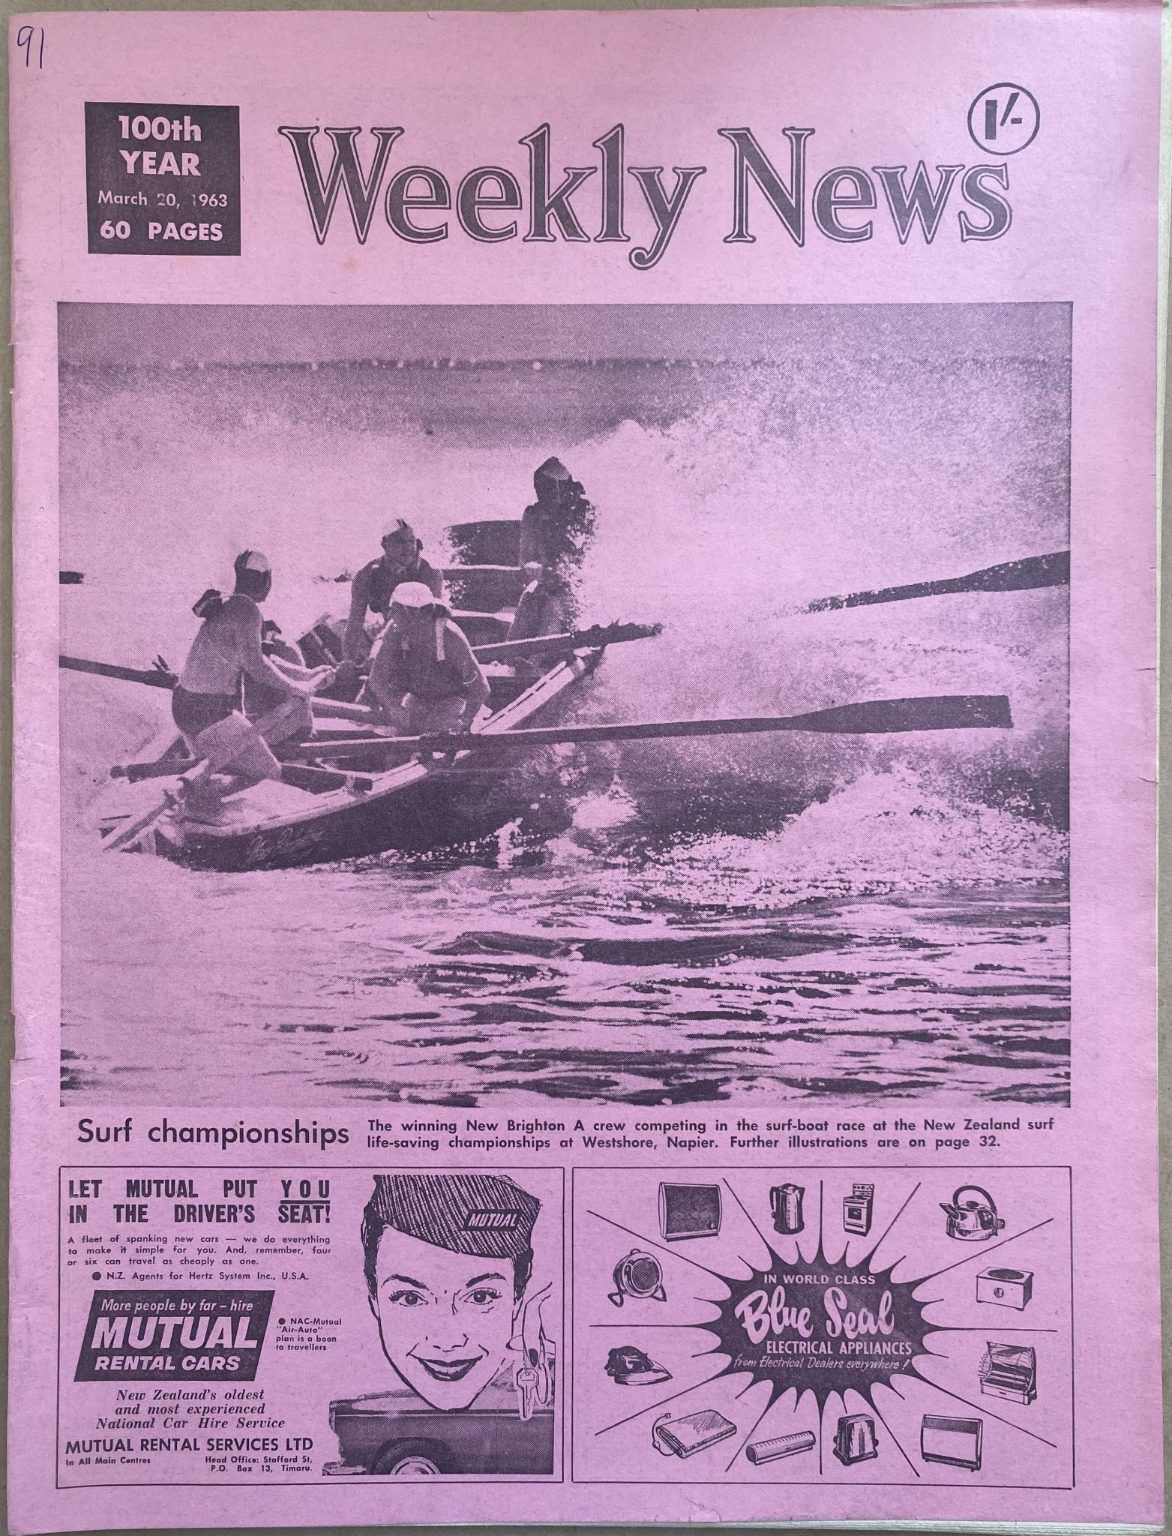 OLD NEWSPAPER: The Weekly News, No. 5182, 20 March 1963